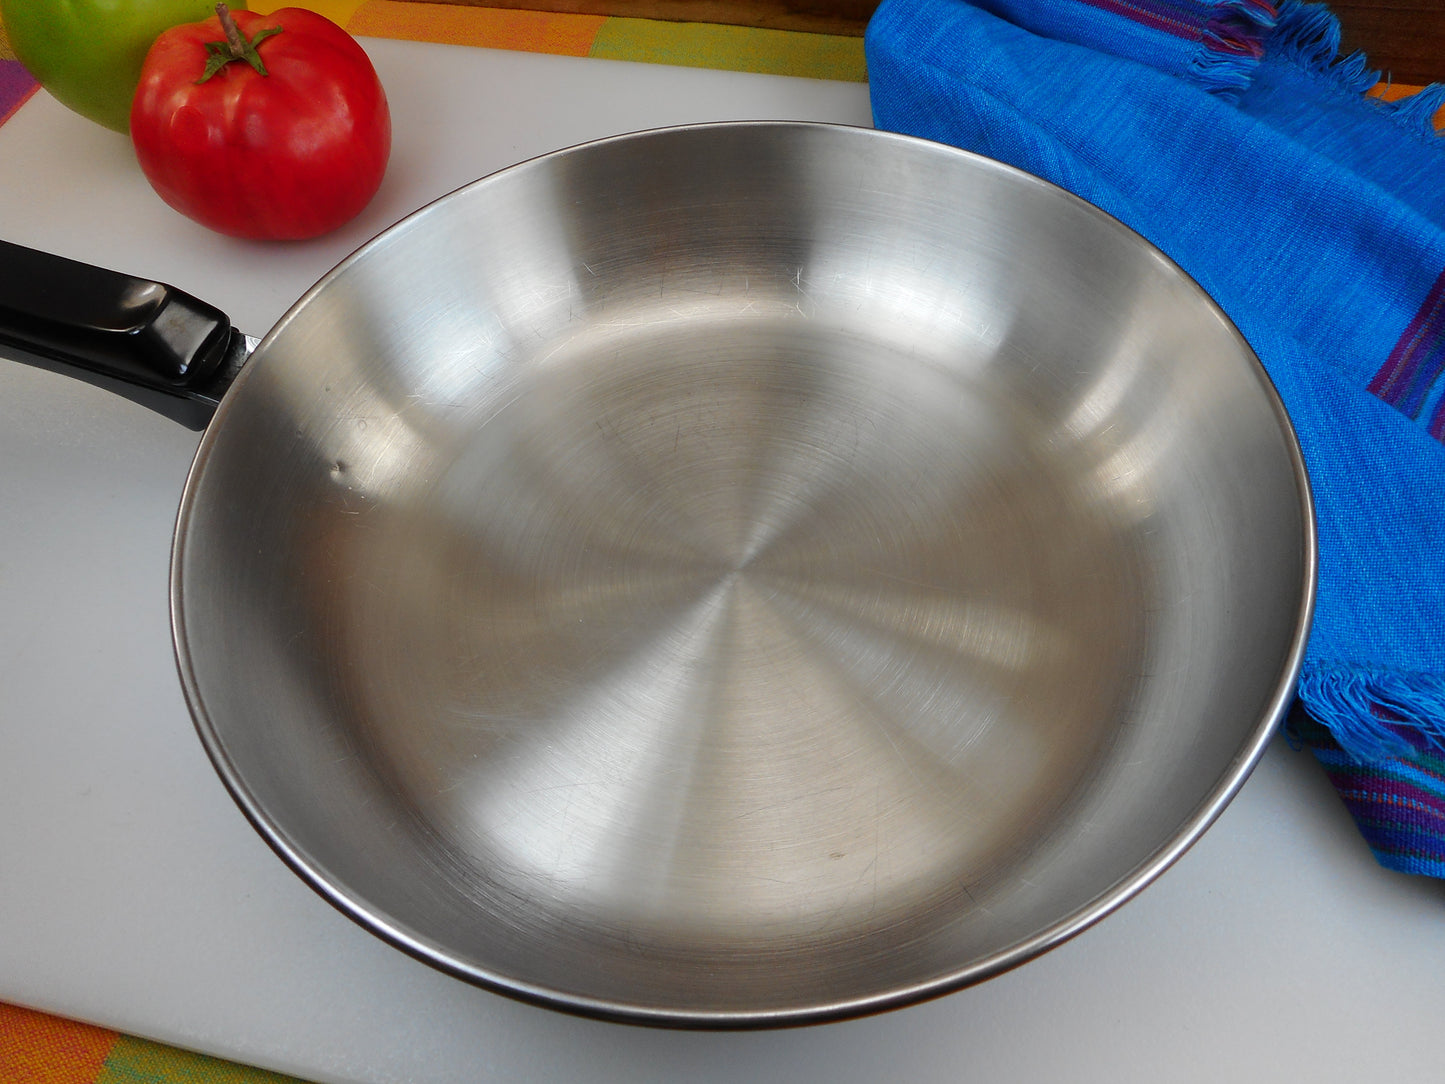 Lagostina Italy Thermoplan Fry Saute Pan Skillet - Stainless 10" Disc Bottom Clean Used